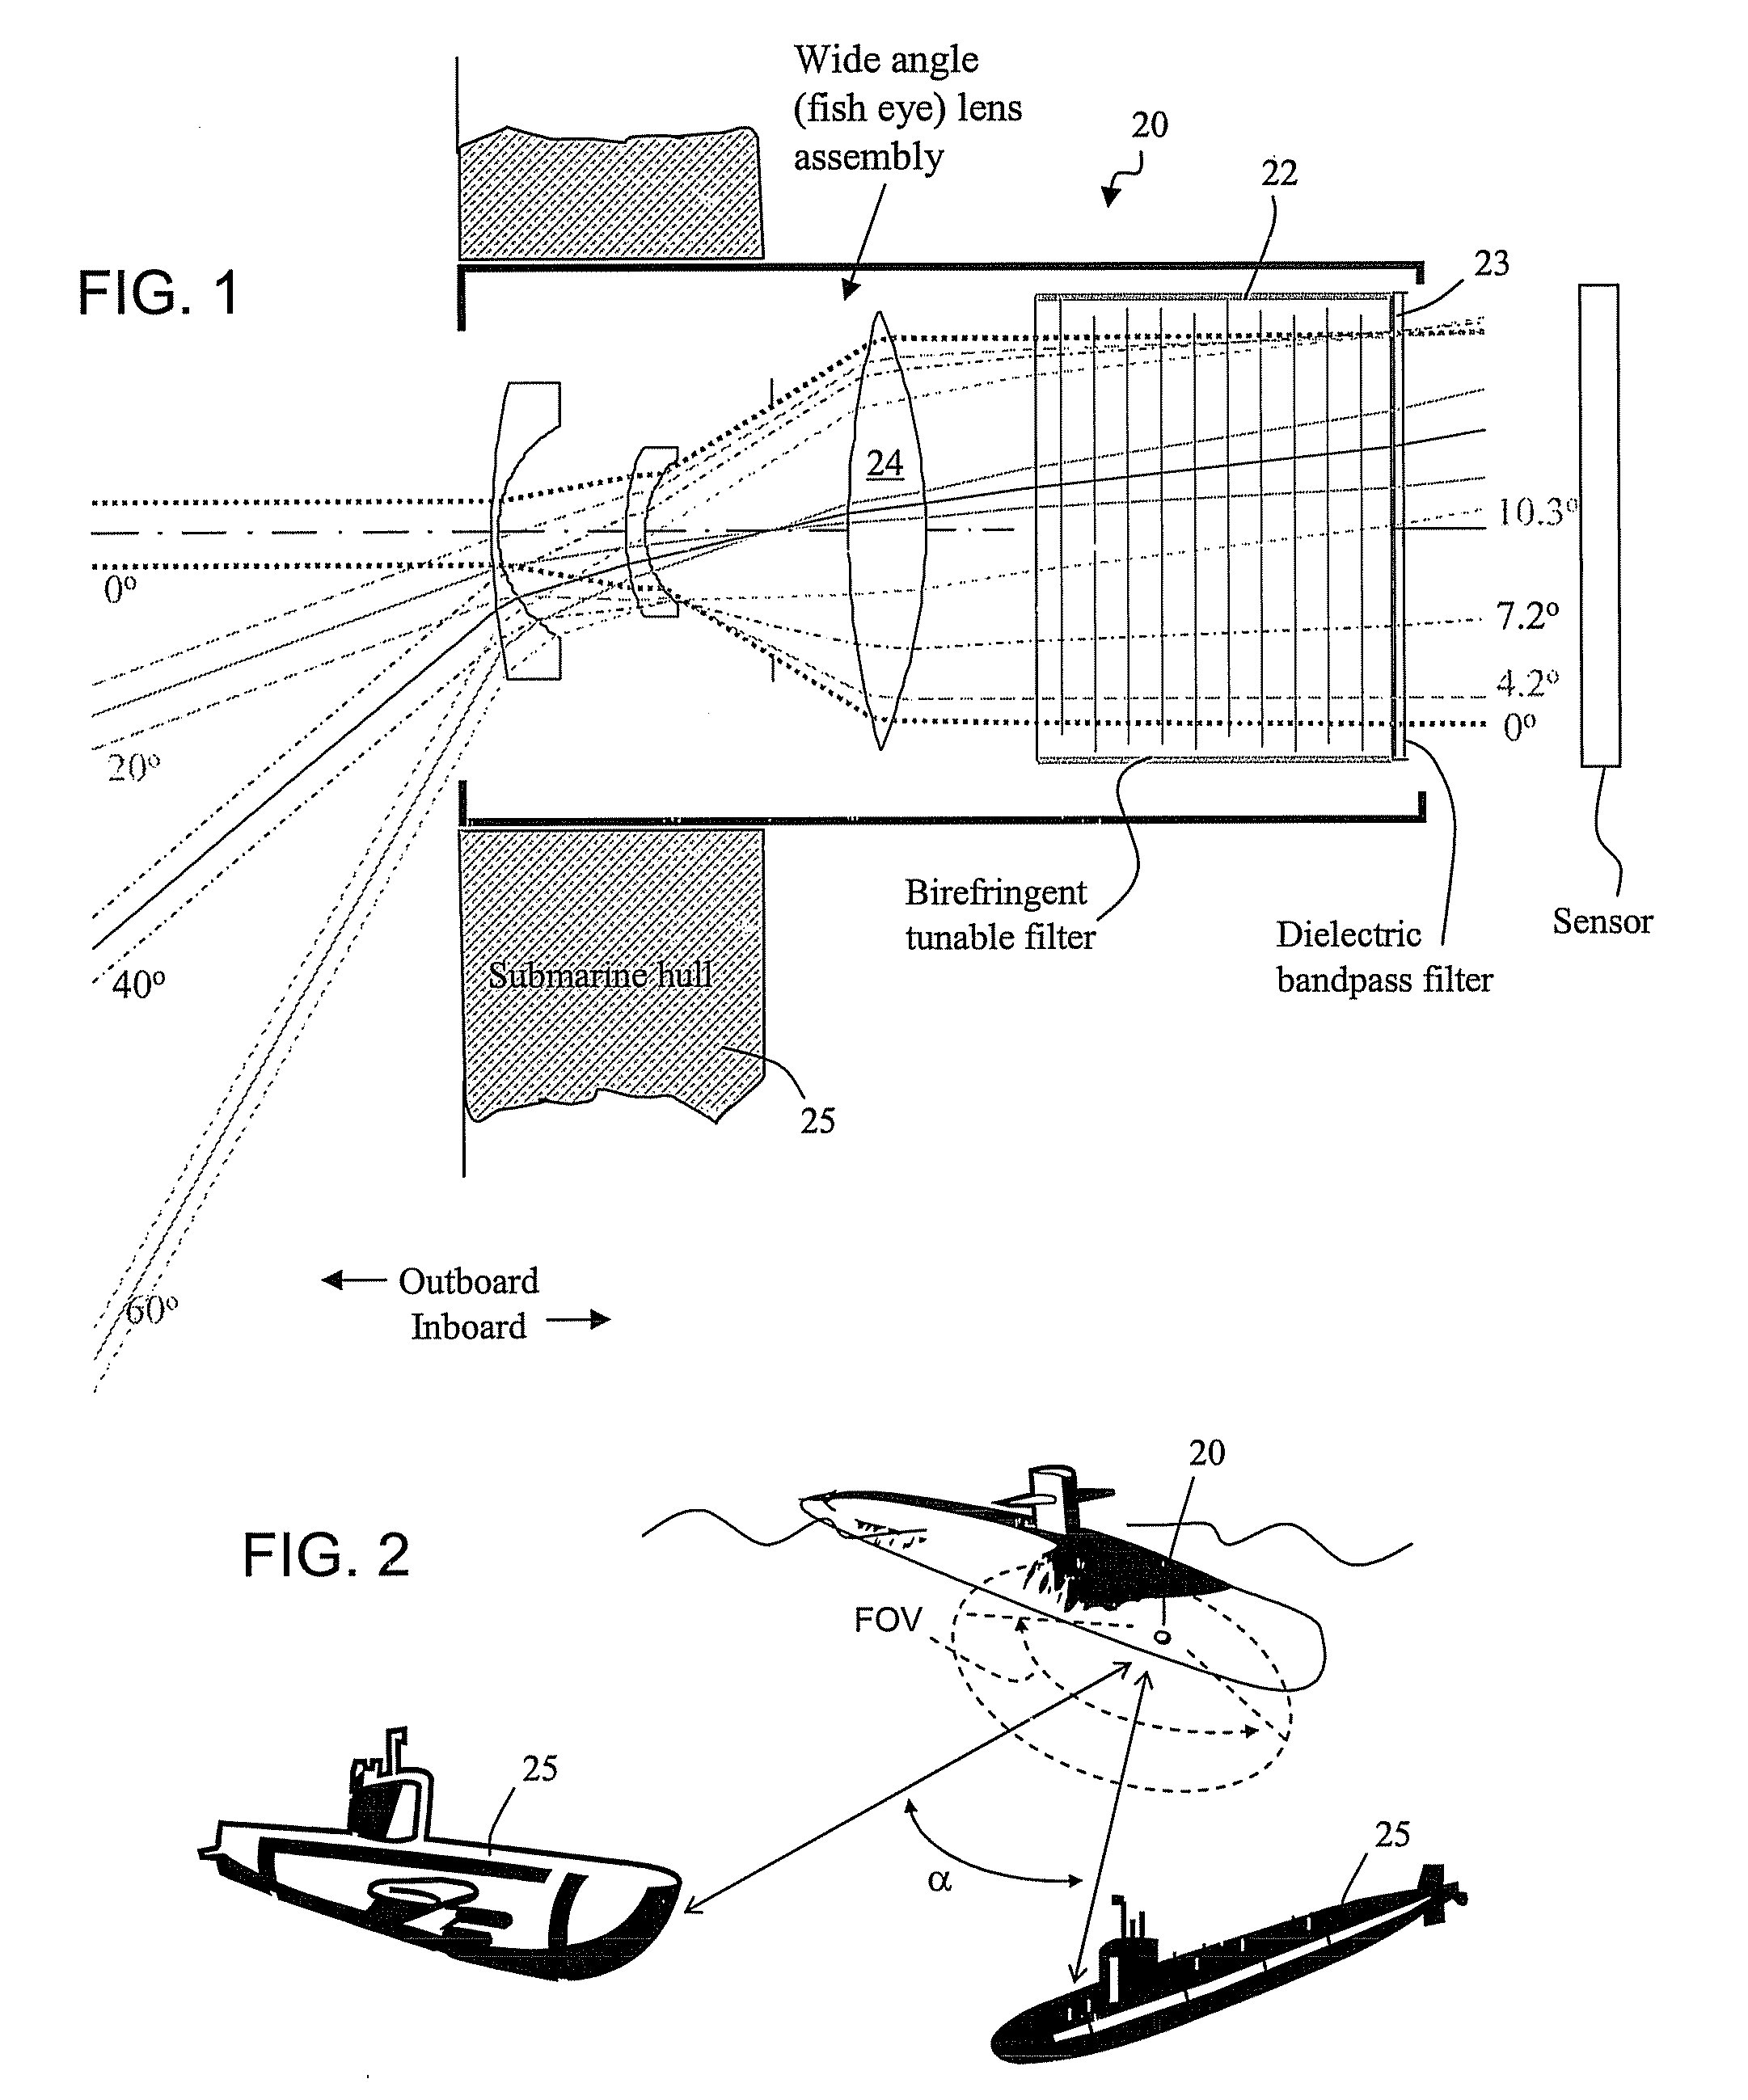 Birefringent spectral filter with wide field of view and associated communications method and apparatus